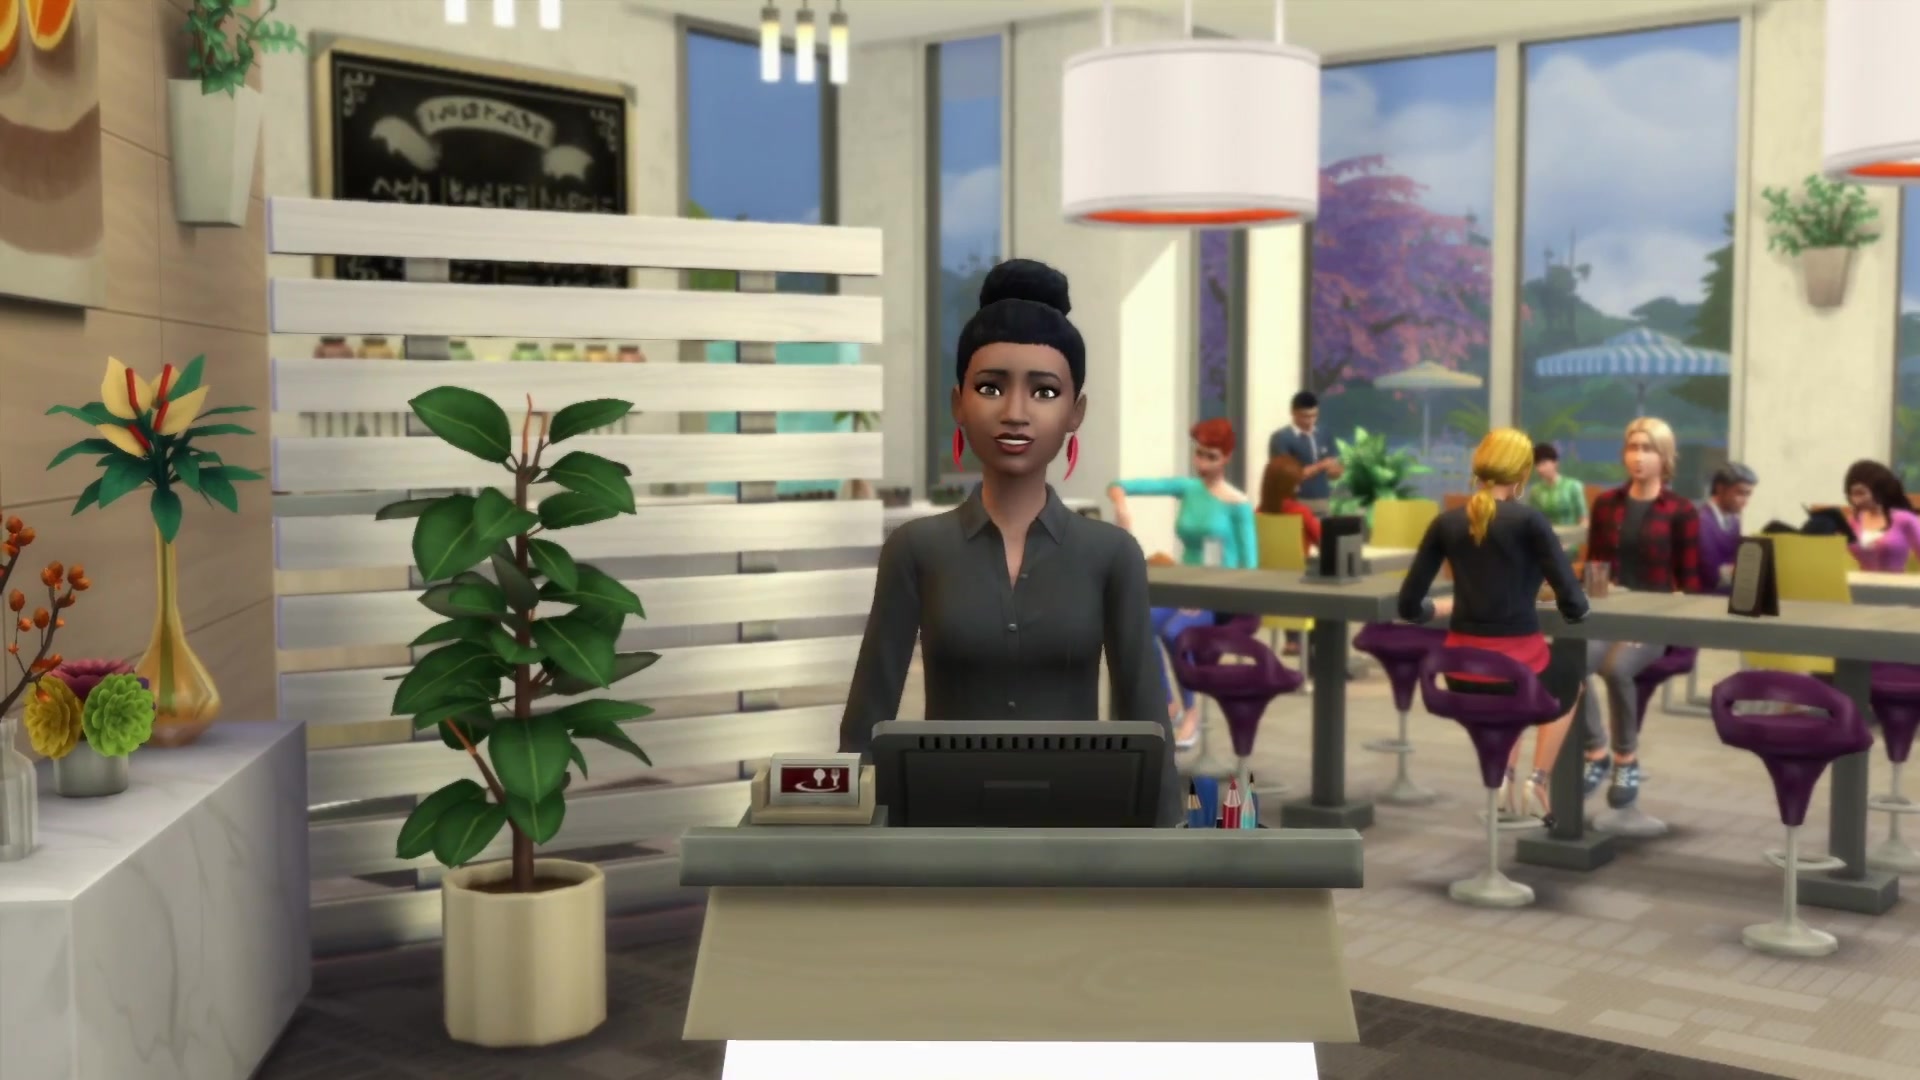 Dine Out Trailer OUT NOW! Release Date June 7th - Page 11 - The Sims Forums